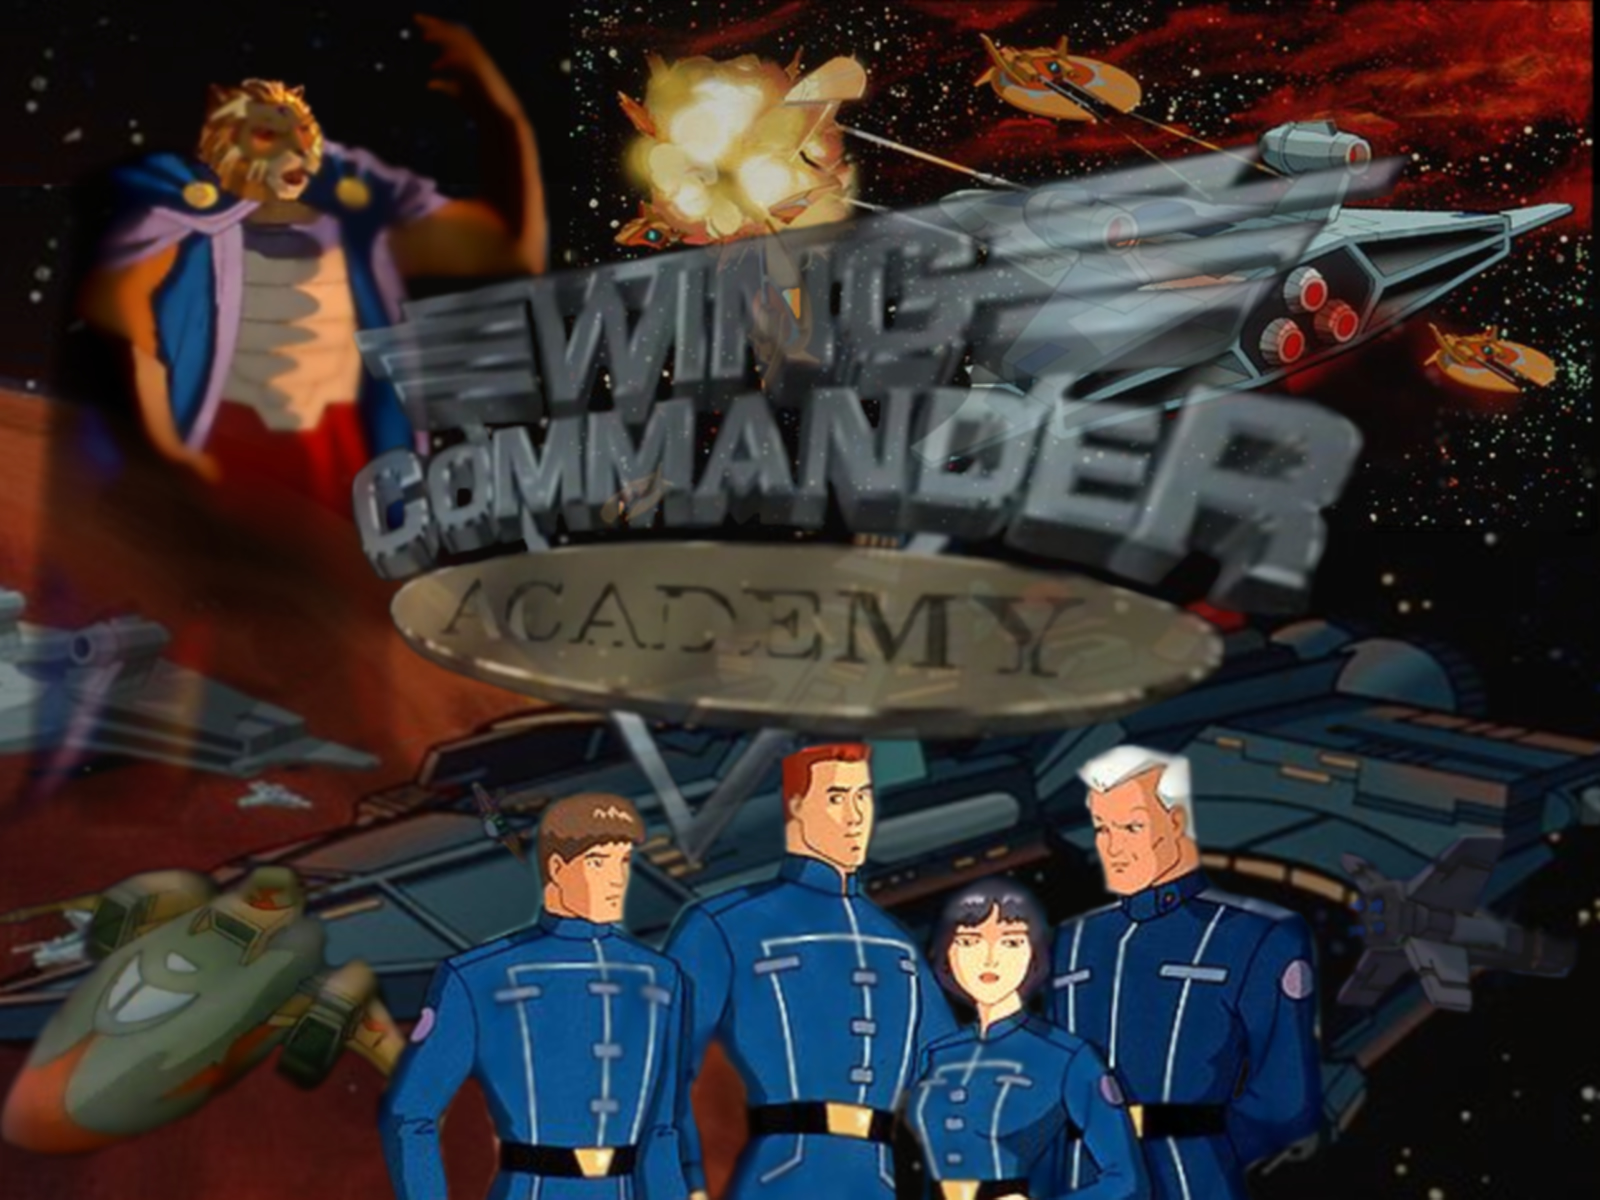 best video game shows - Wing Commander Academy